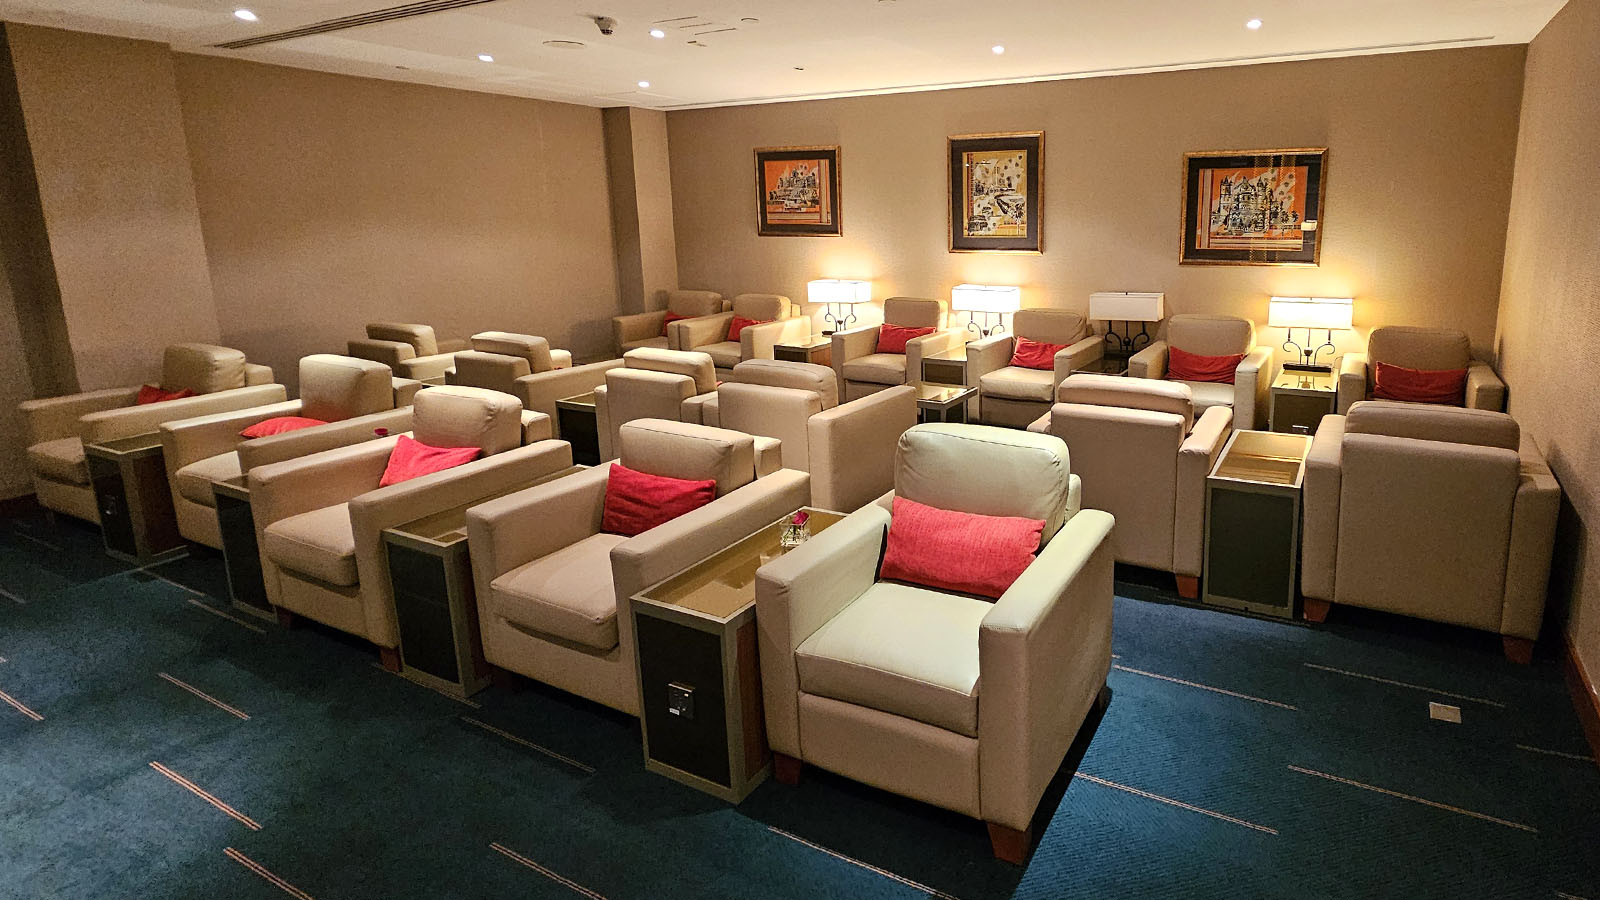 Cosy end in the Emirates Business Class Lounge, Dubai T3 Concourse C